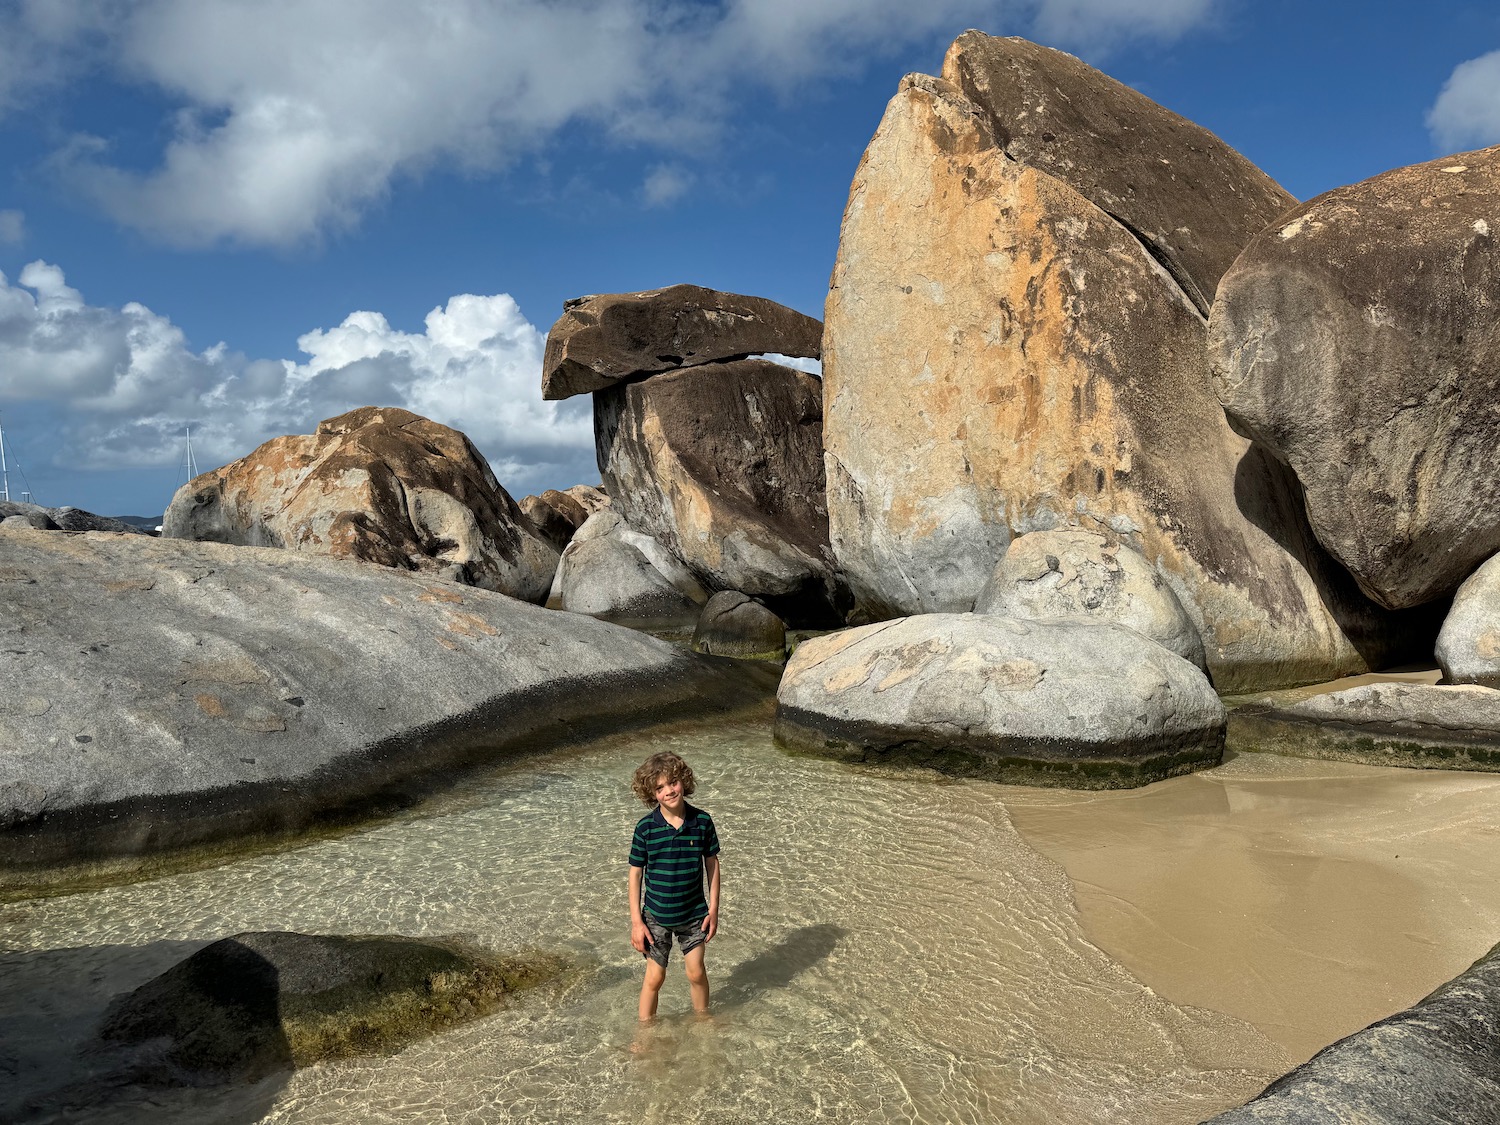 a boy standing in water with large rocks in the background